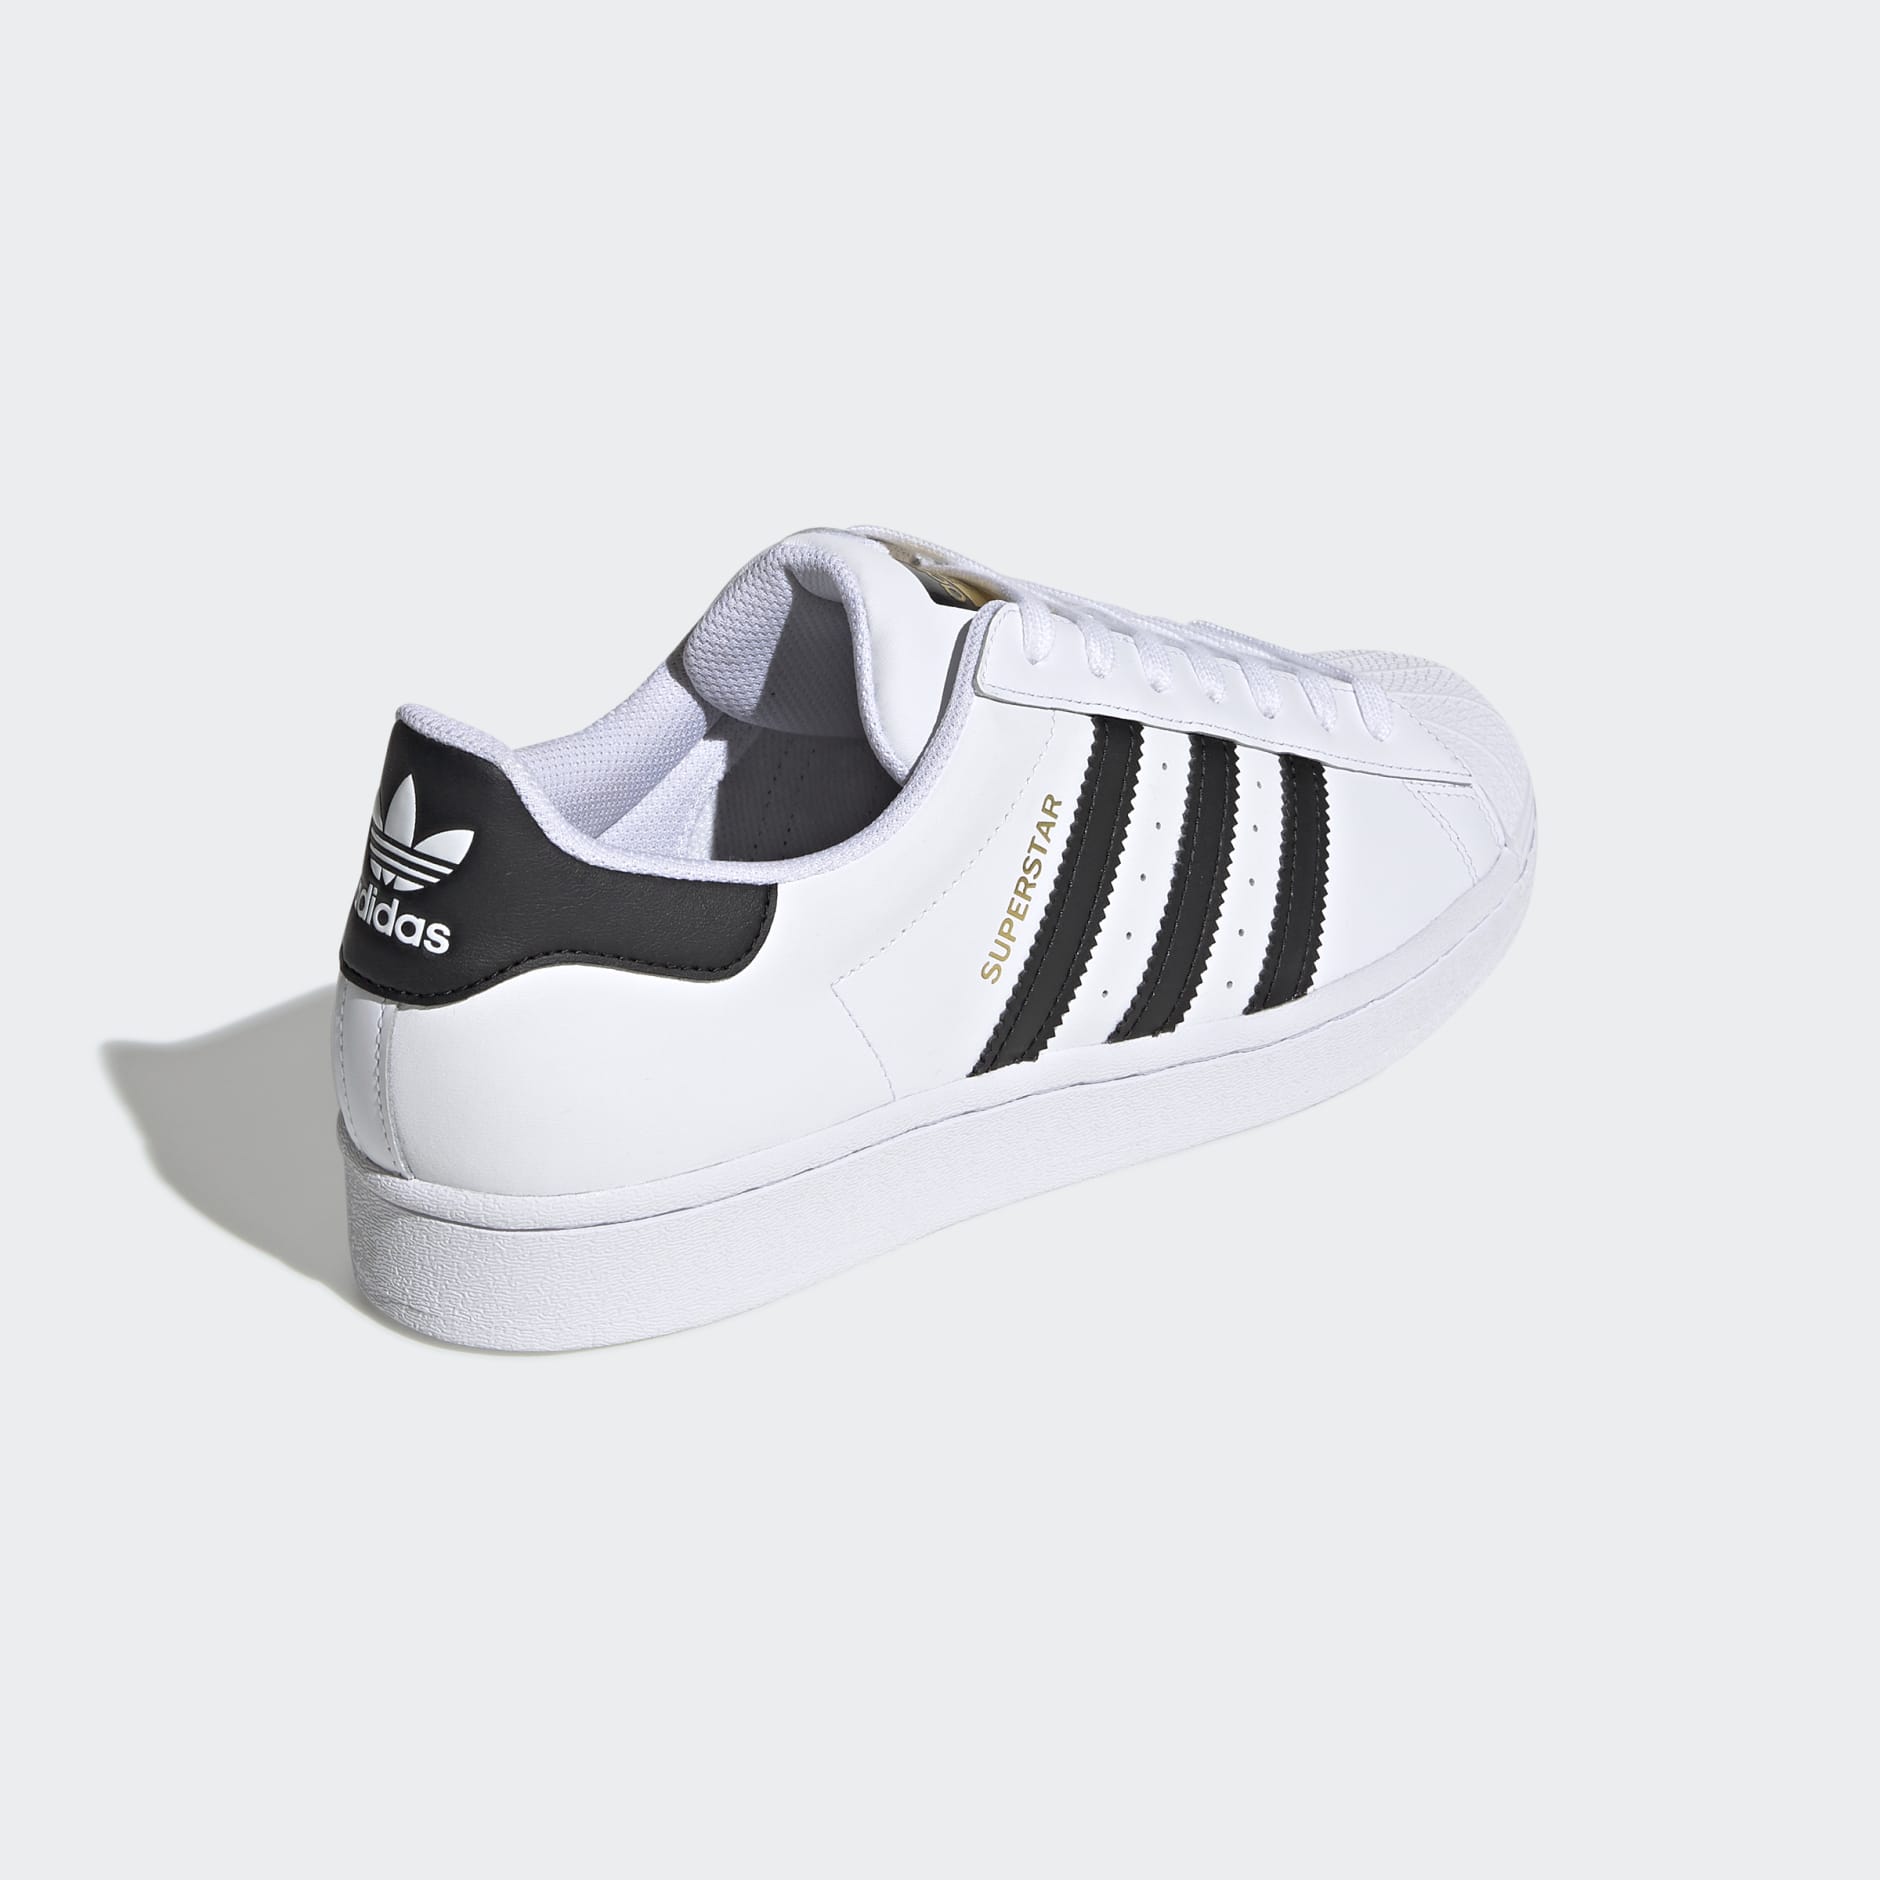 White Adidas Superstar Shoes, Size: 41 To 45